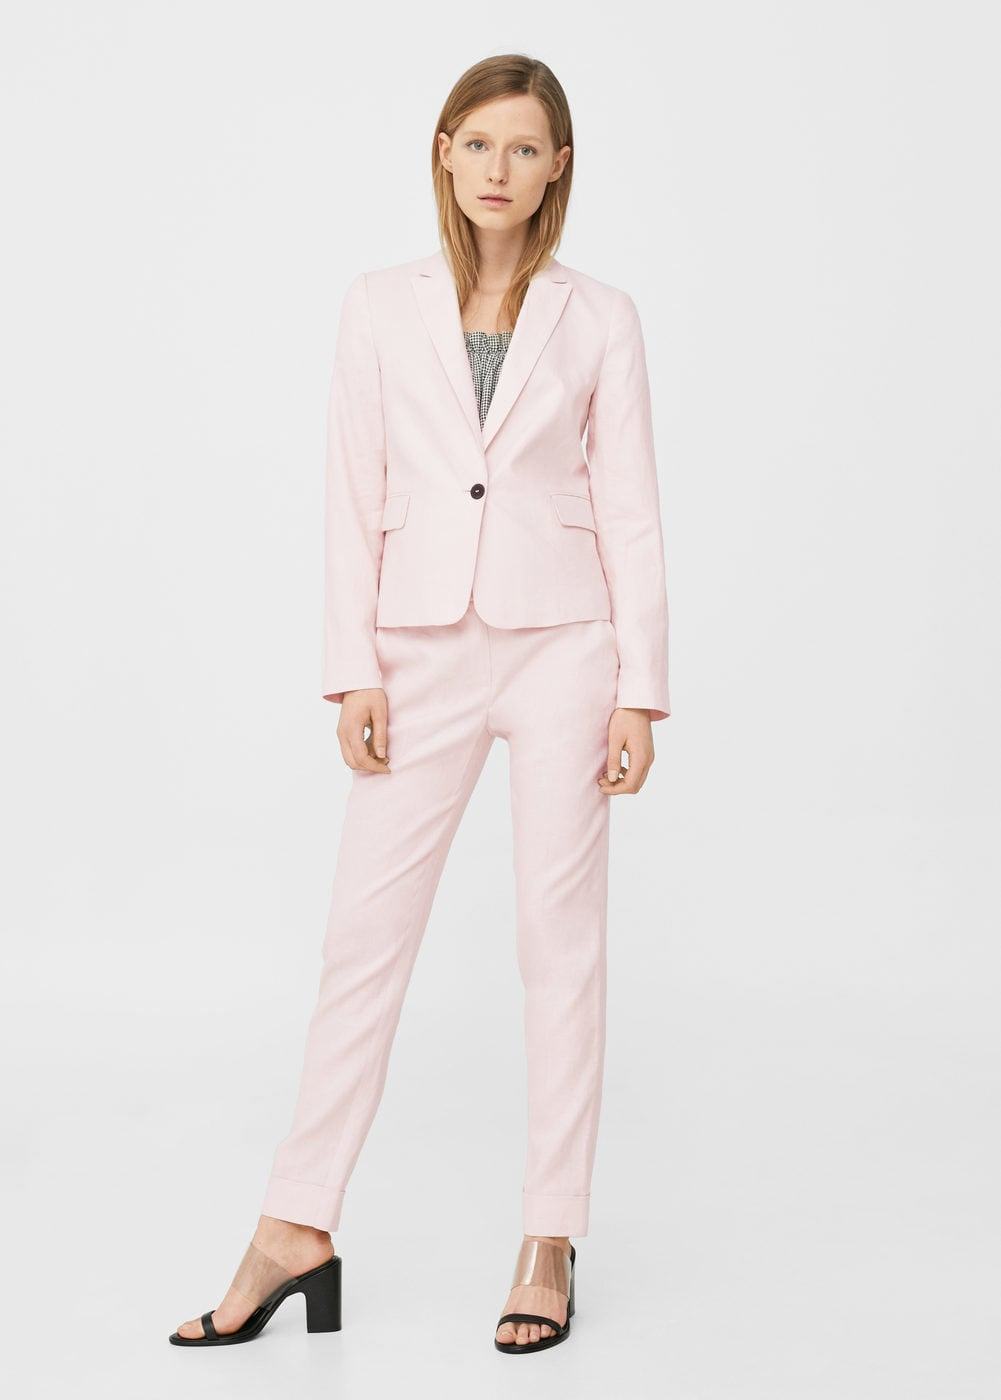 Suits For Women Ready To Lead Their World: Became The Best Dressed Employee In Your Company